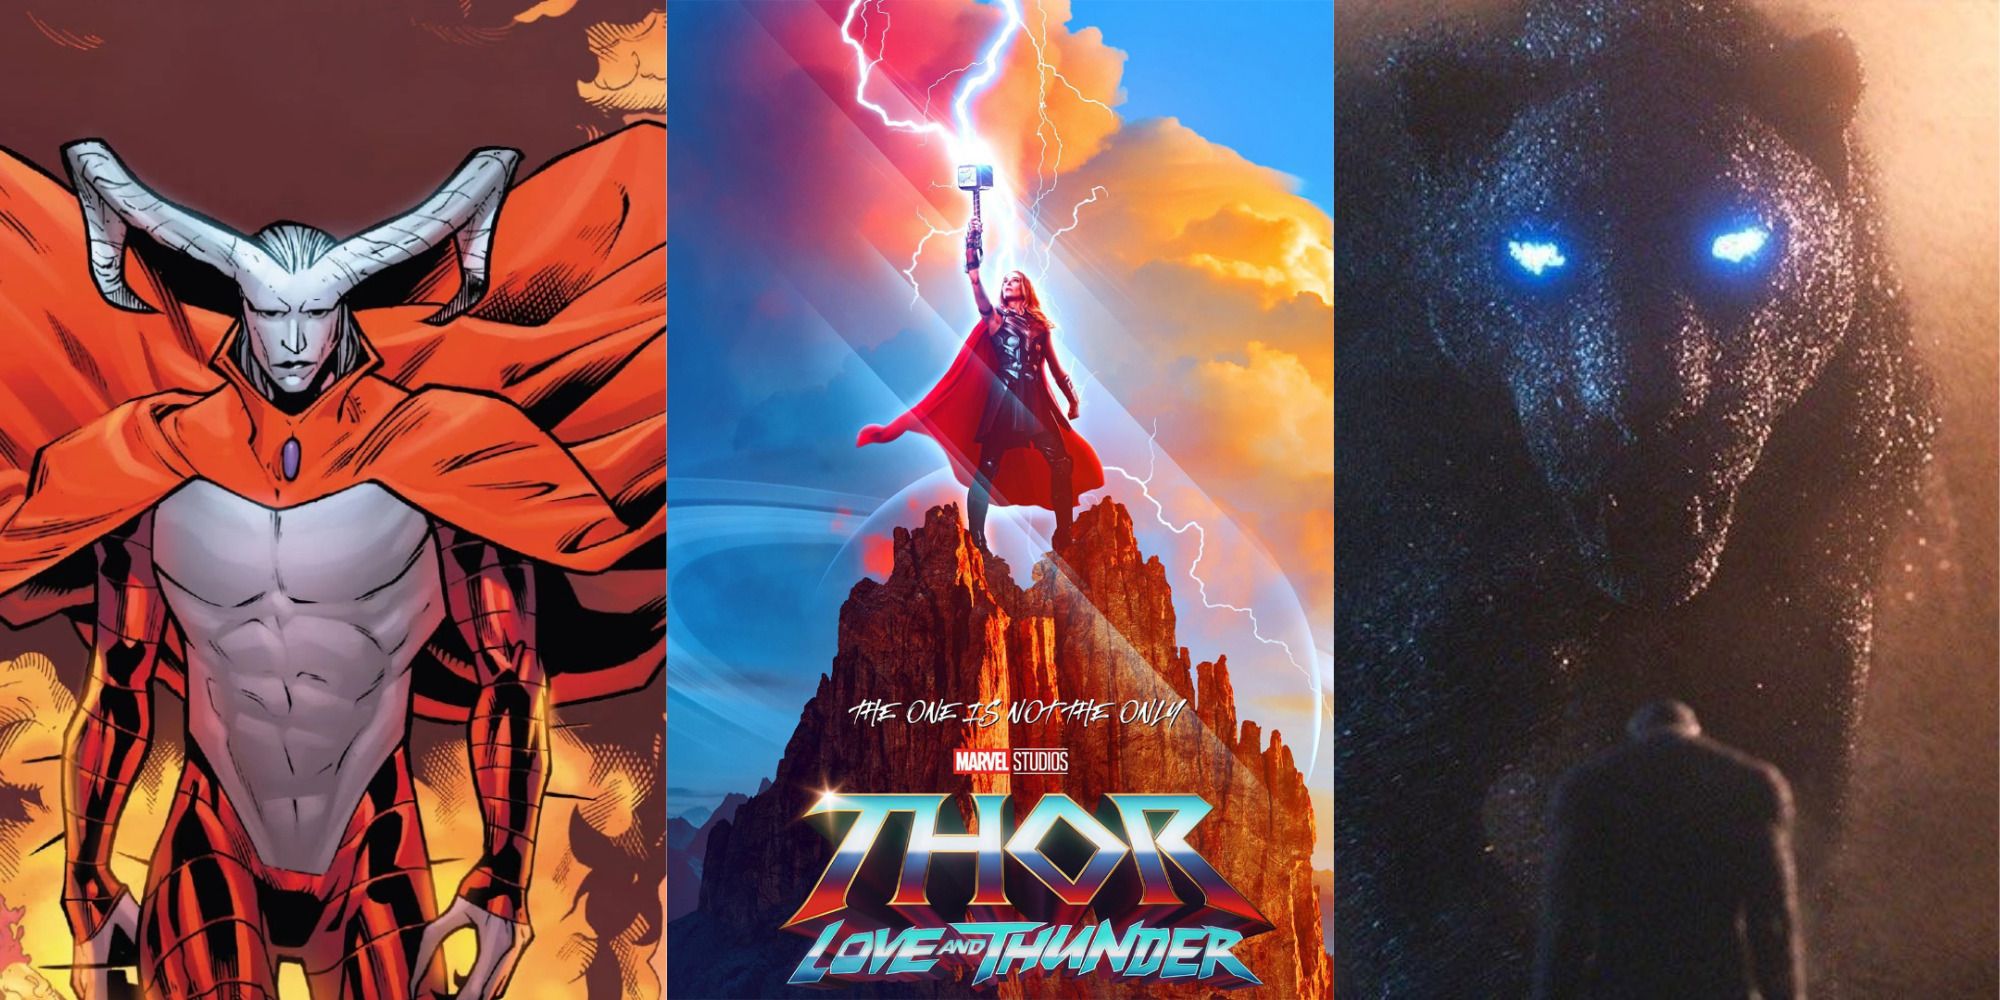 A split image of Chthon, Bast, and the Thor: Love and Thunder poster